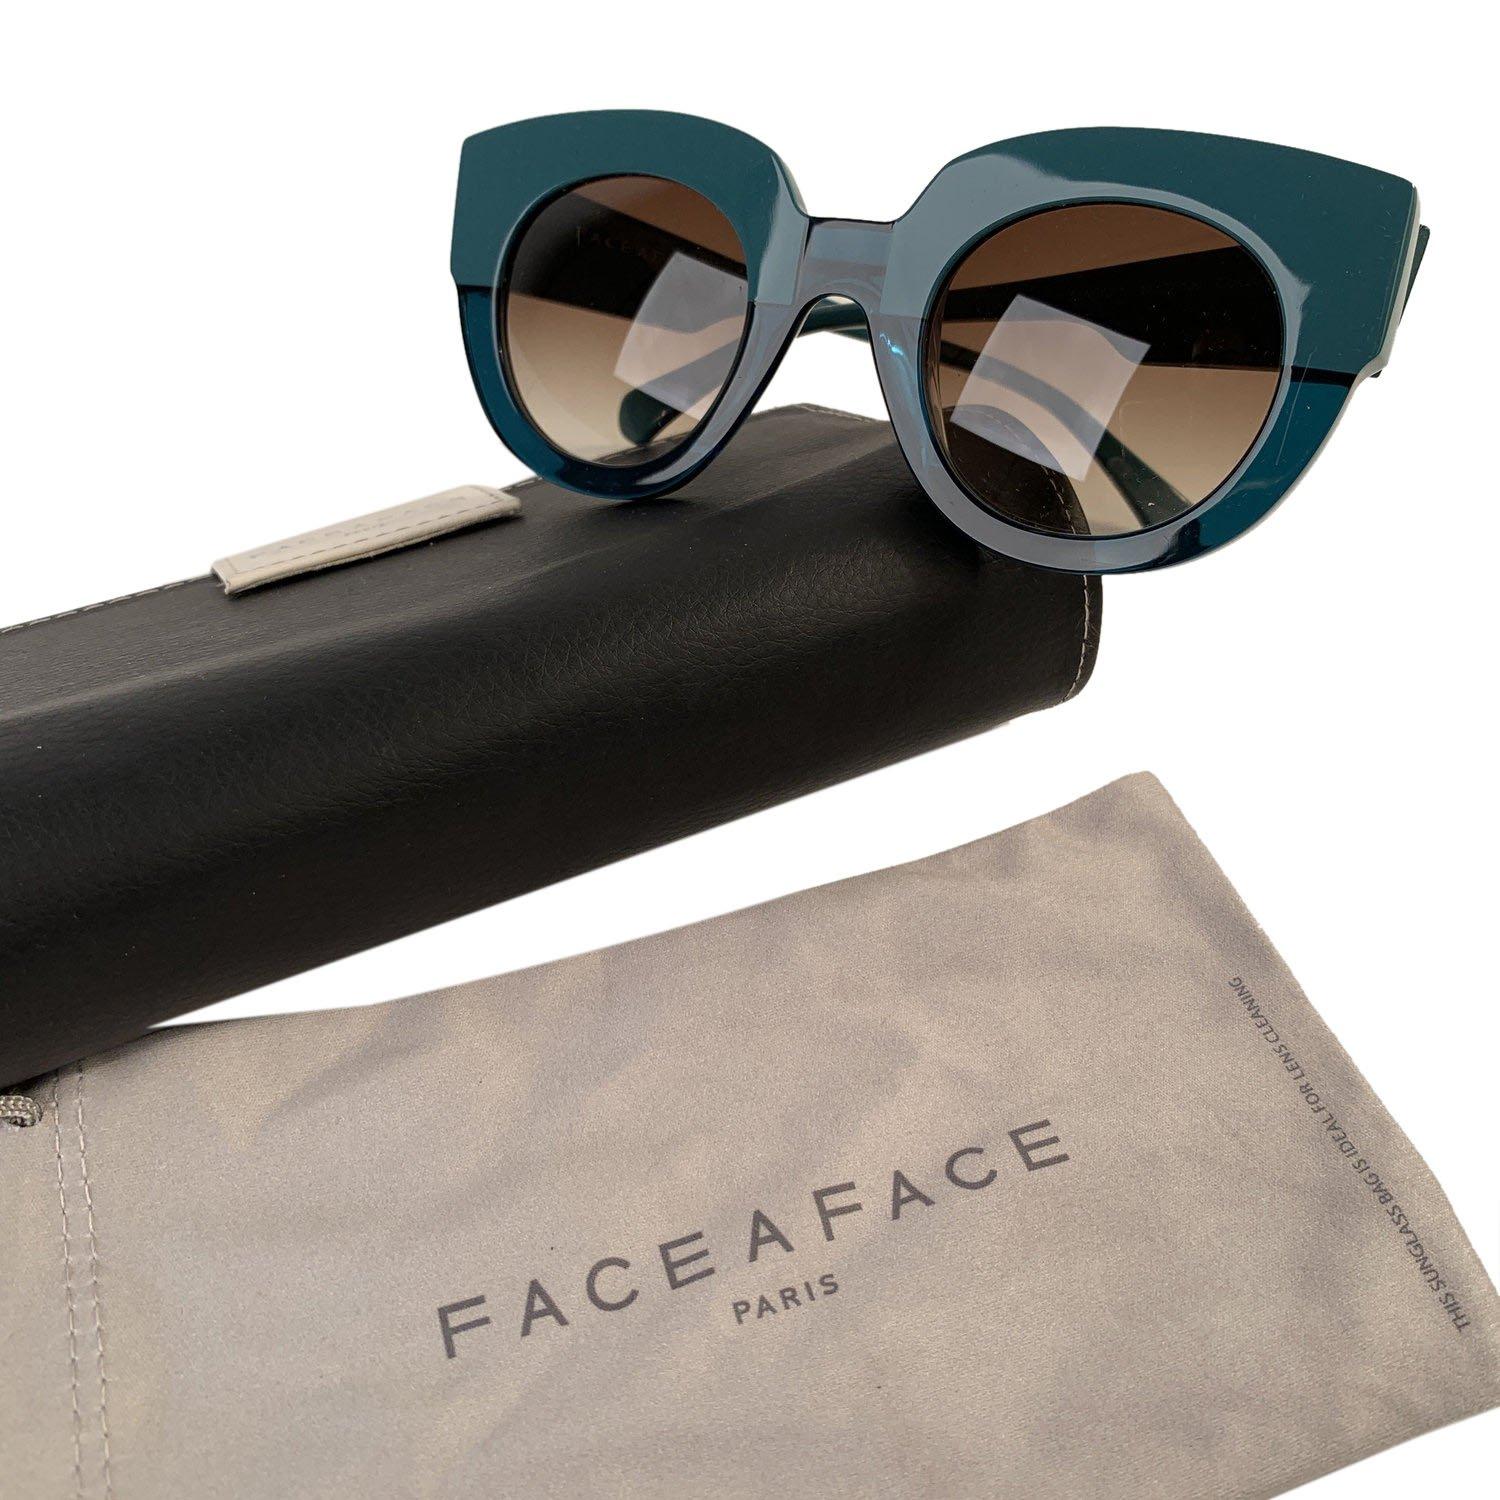 MATERIAL: Acetate COLOR: Blue, Green MODEL: Masai 1 GENDER: Adult Unisex SIZE: Medium Condition NOS - New Old Vintage Stock - Mint Condition, never worn or used - Comes with Face a Face case Measurements TEMPLE MAX. LENGTH: 139 mm EYE / LENS MAX.